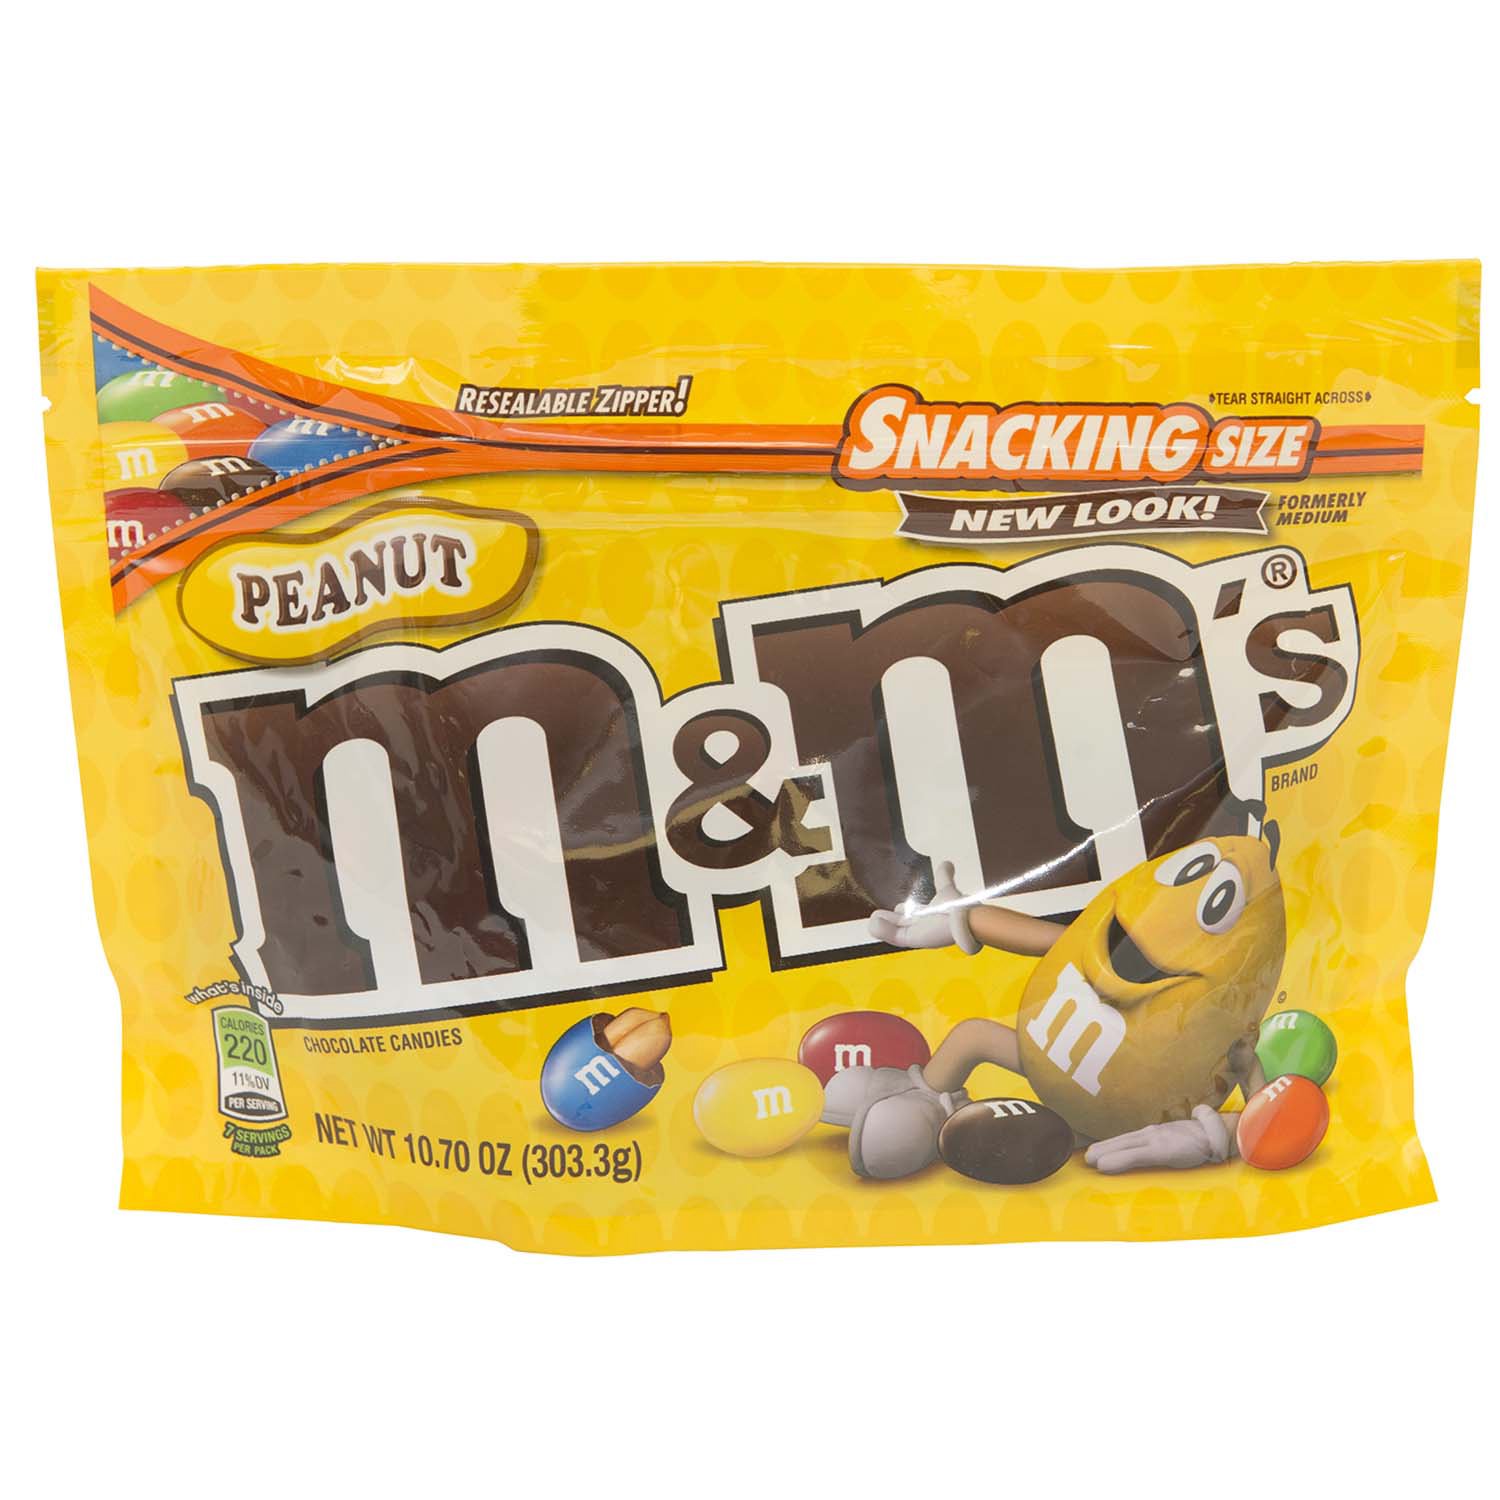 I got an all-yellow package of peanut butter M&M's : r